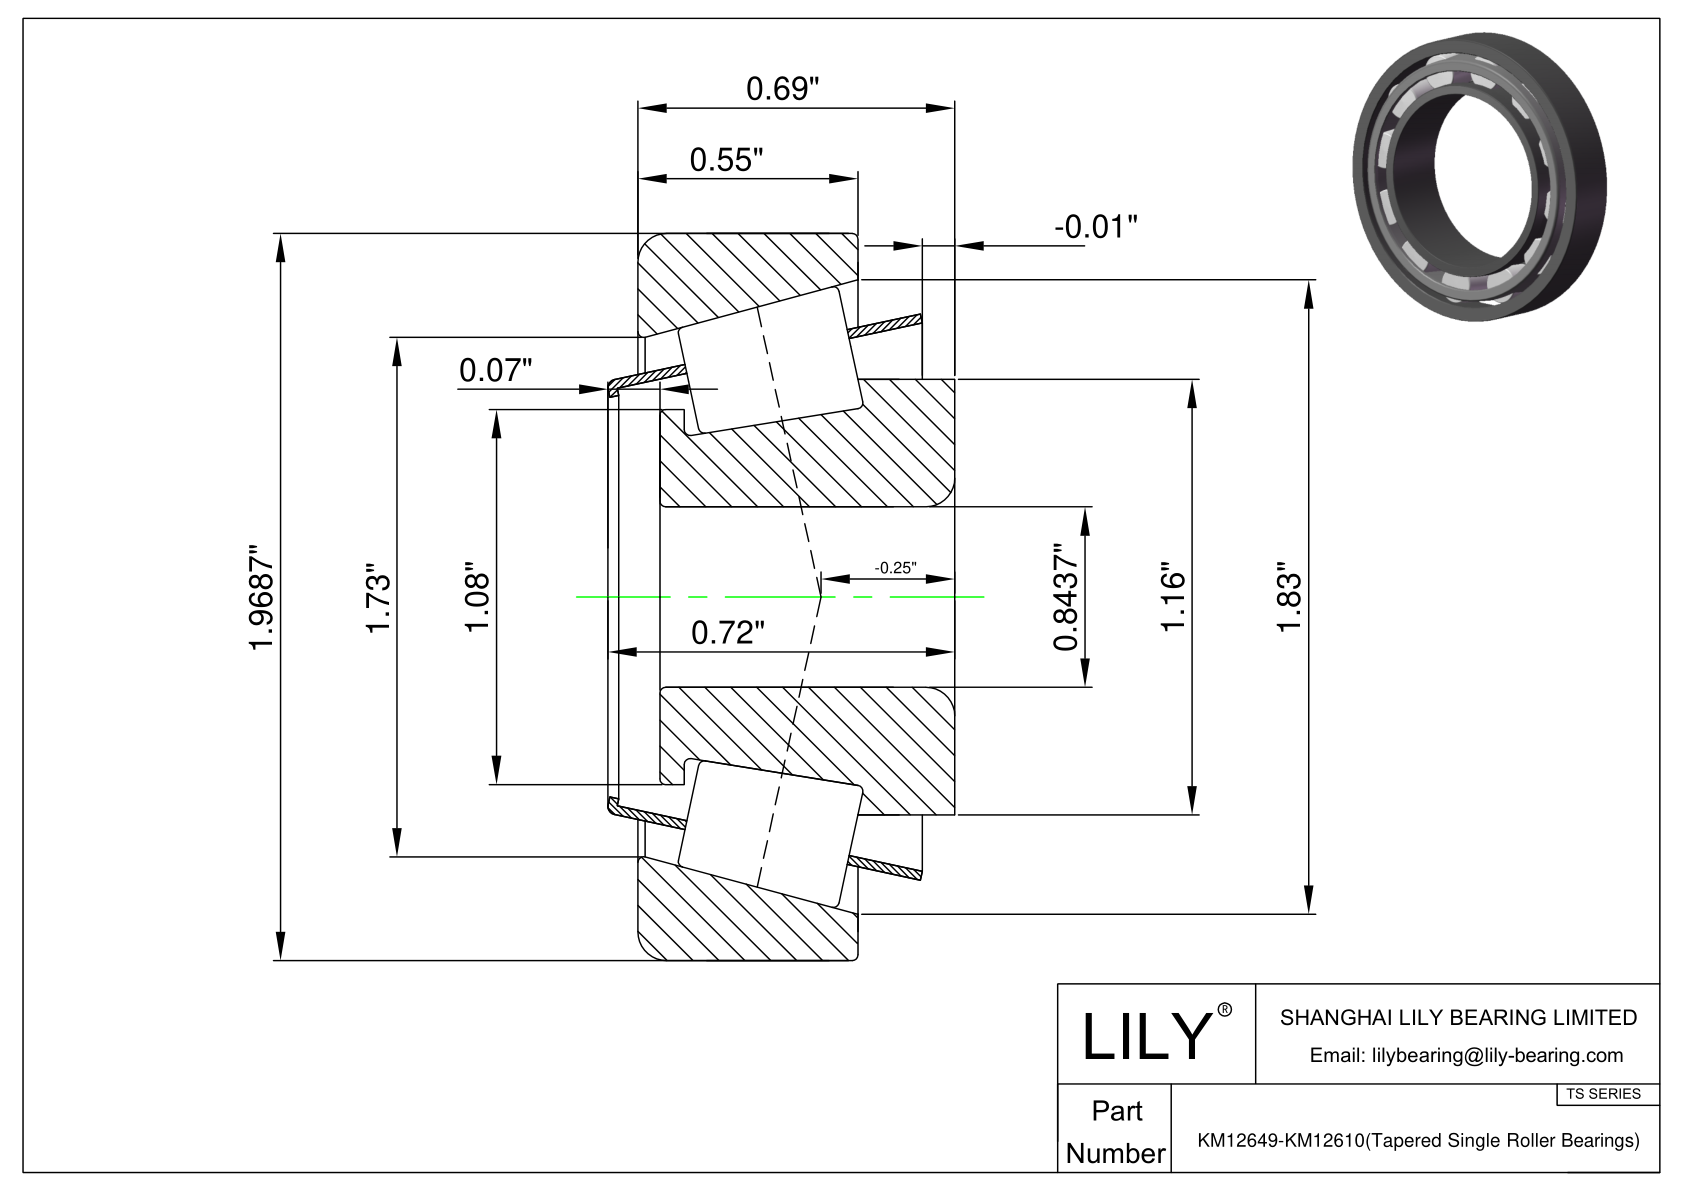 KM12649-KM12610 TS (Tapered Single Roller Bearings) (Imperial) cad drawing